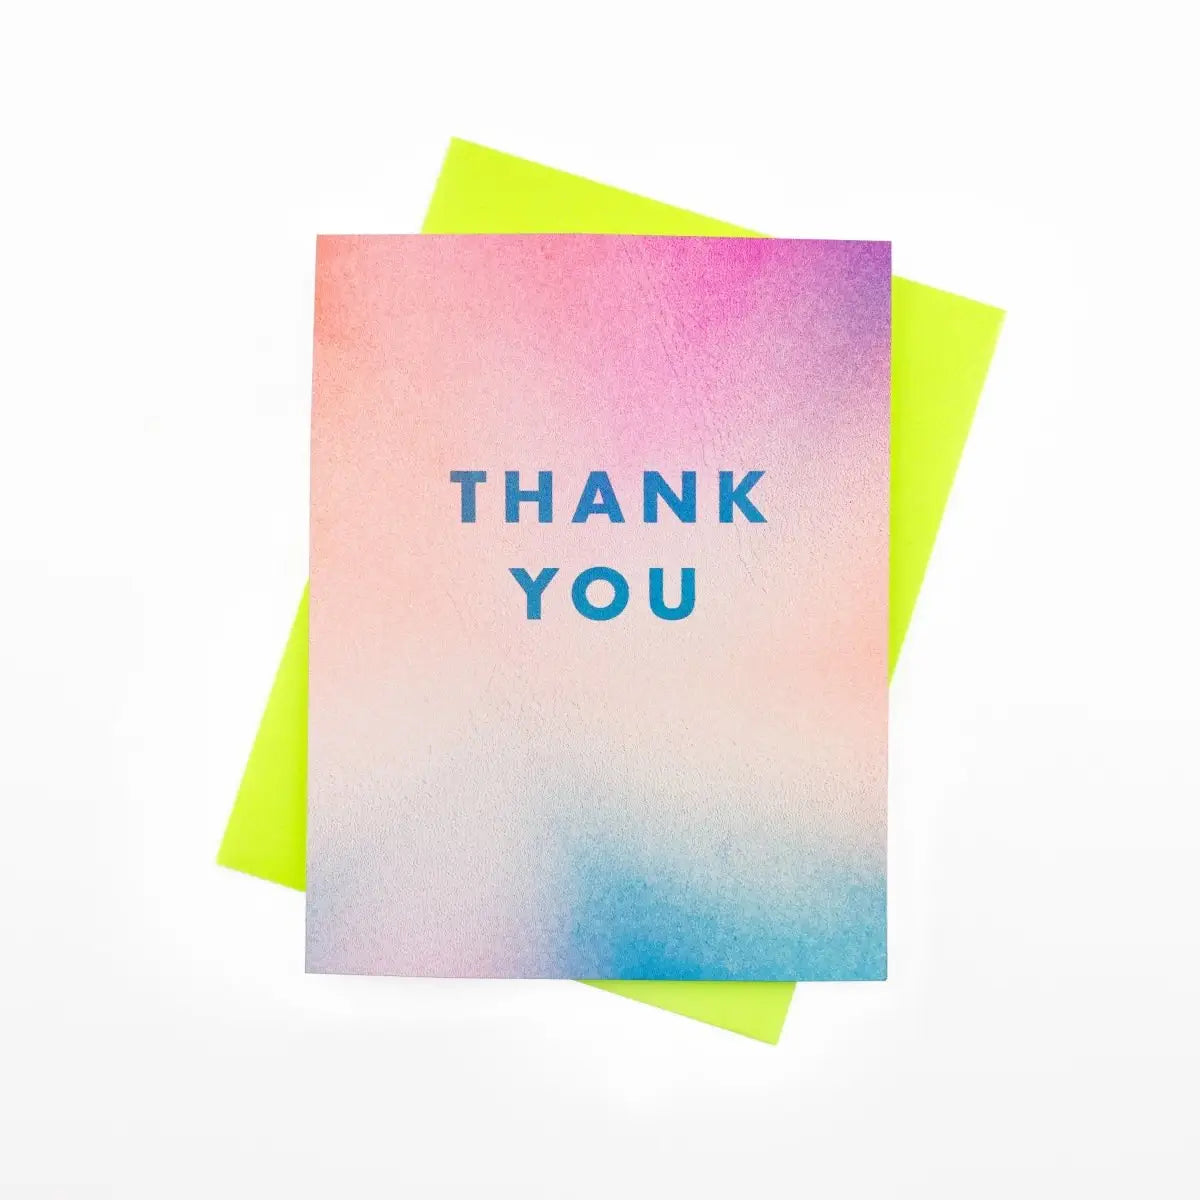 Peach, pink, and blue gradient card. Blue text reads "thank you" 